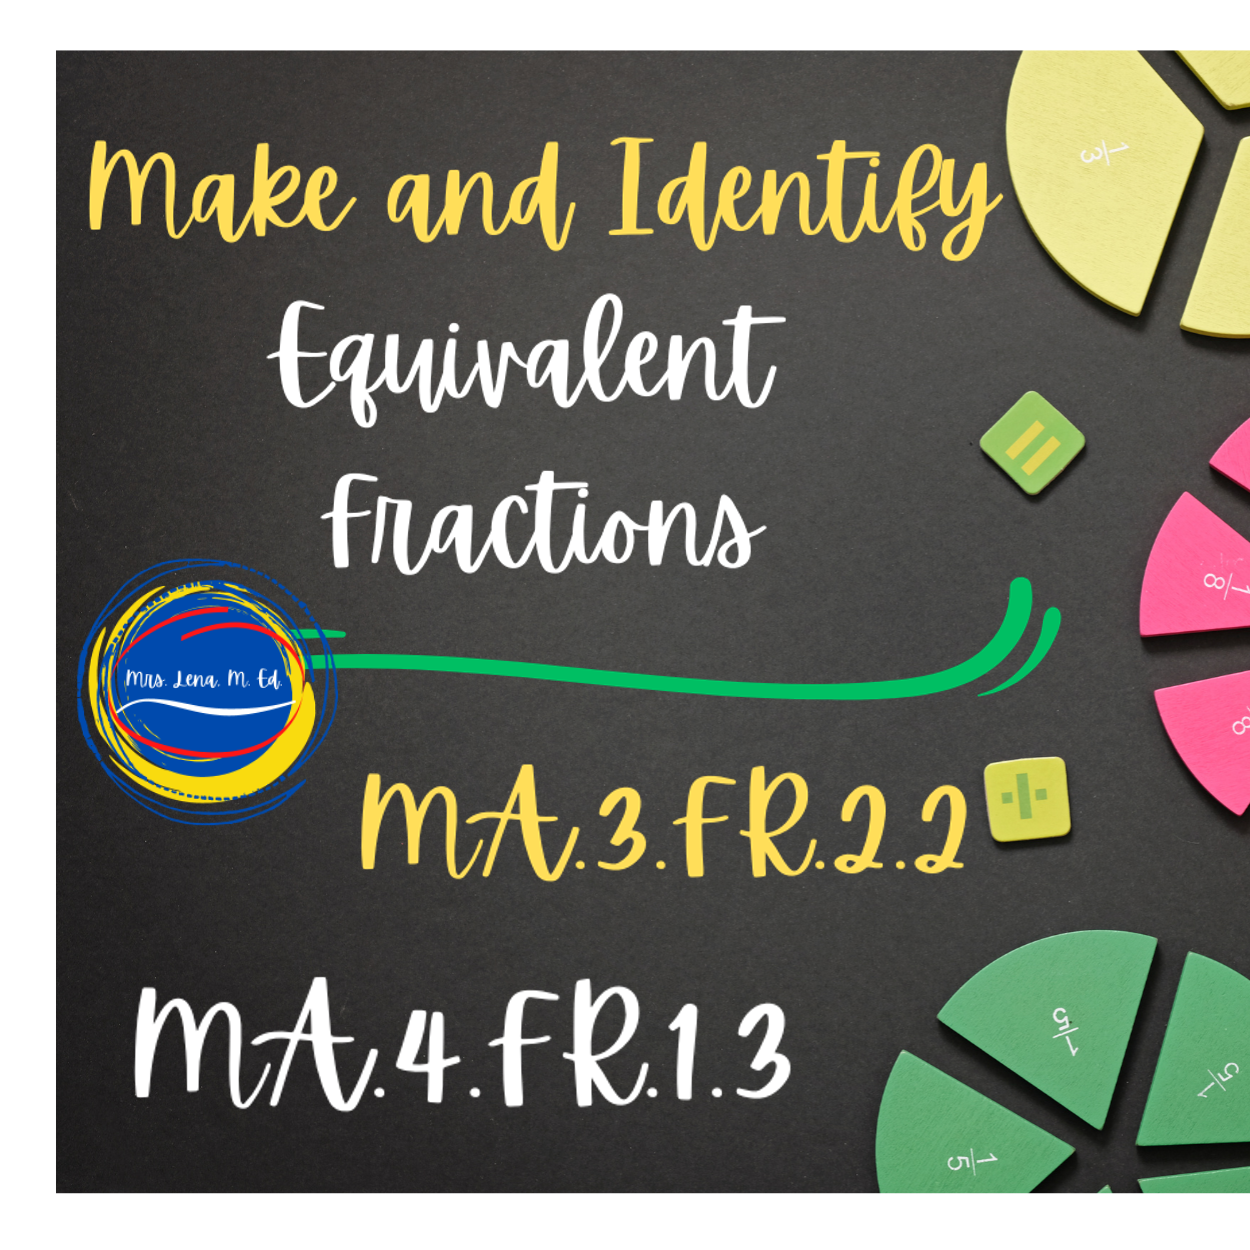 Composing and Identifying Equivalent Fractions MA.4.FR.1.3 and MA.3.FR.2.2

